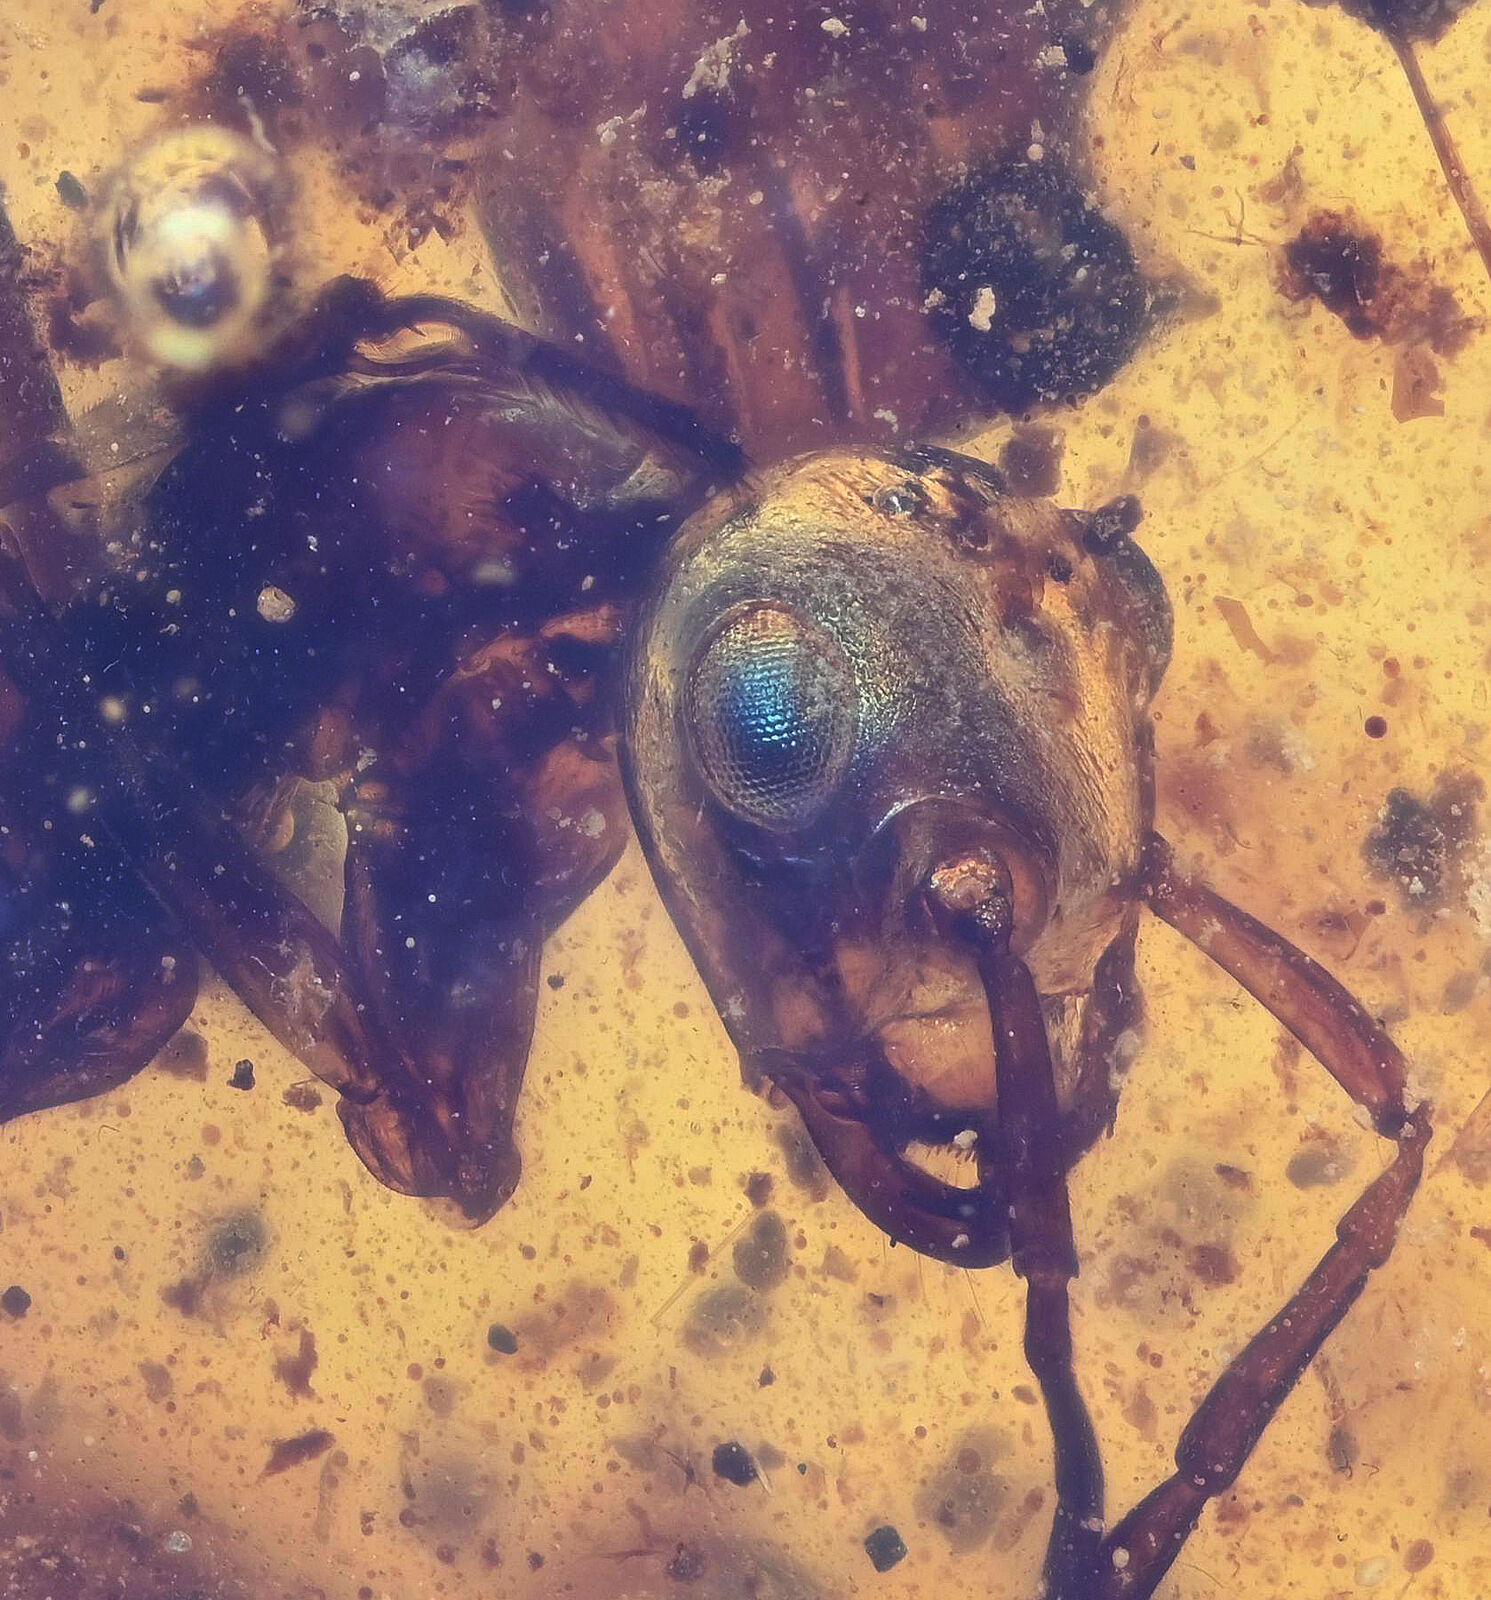 Extinct Sphecomyrma Ant, Fossil Inclusion in Burmese Amber